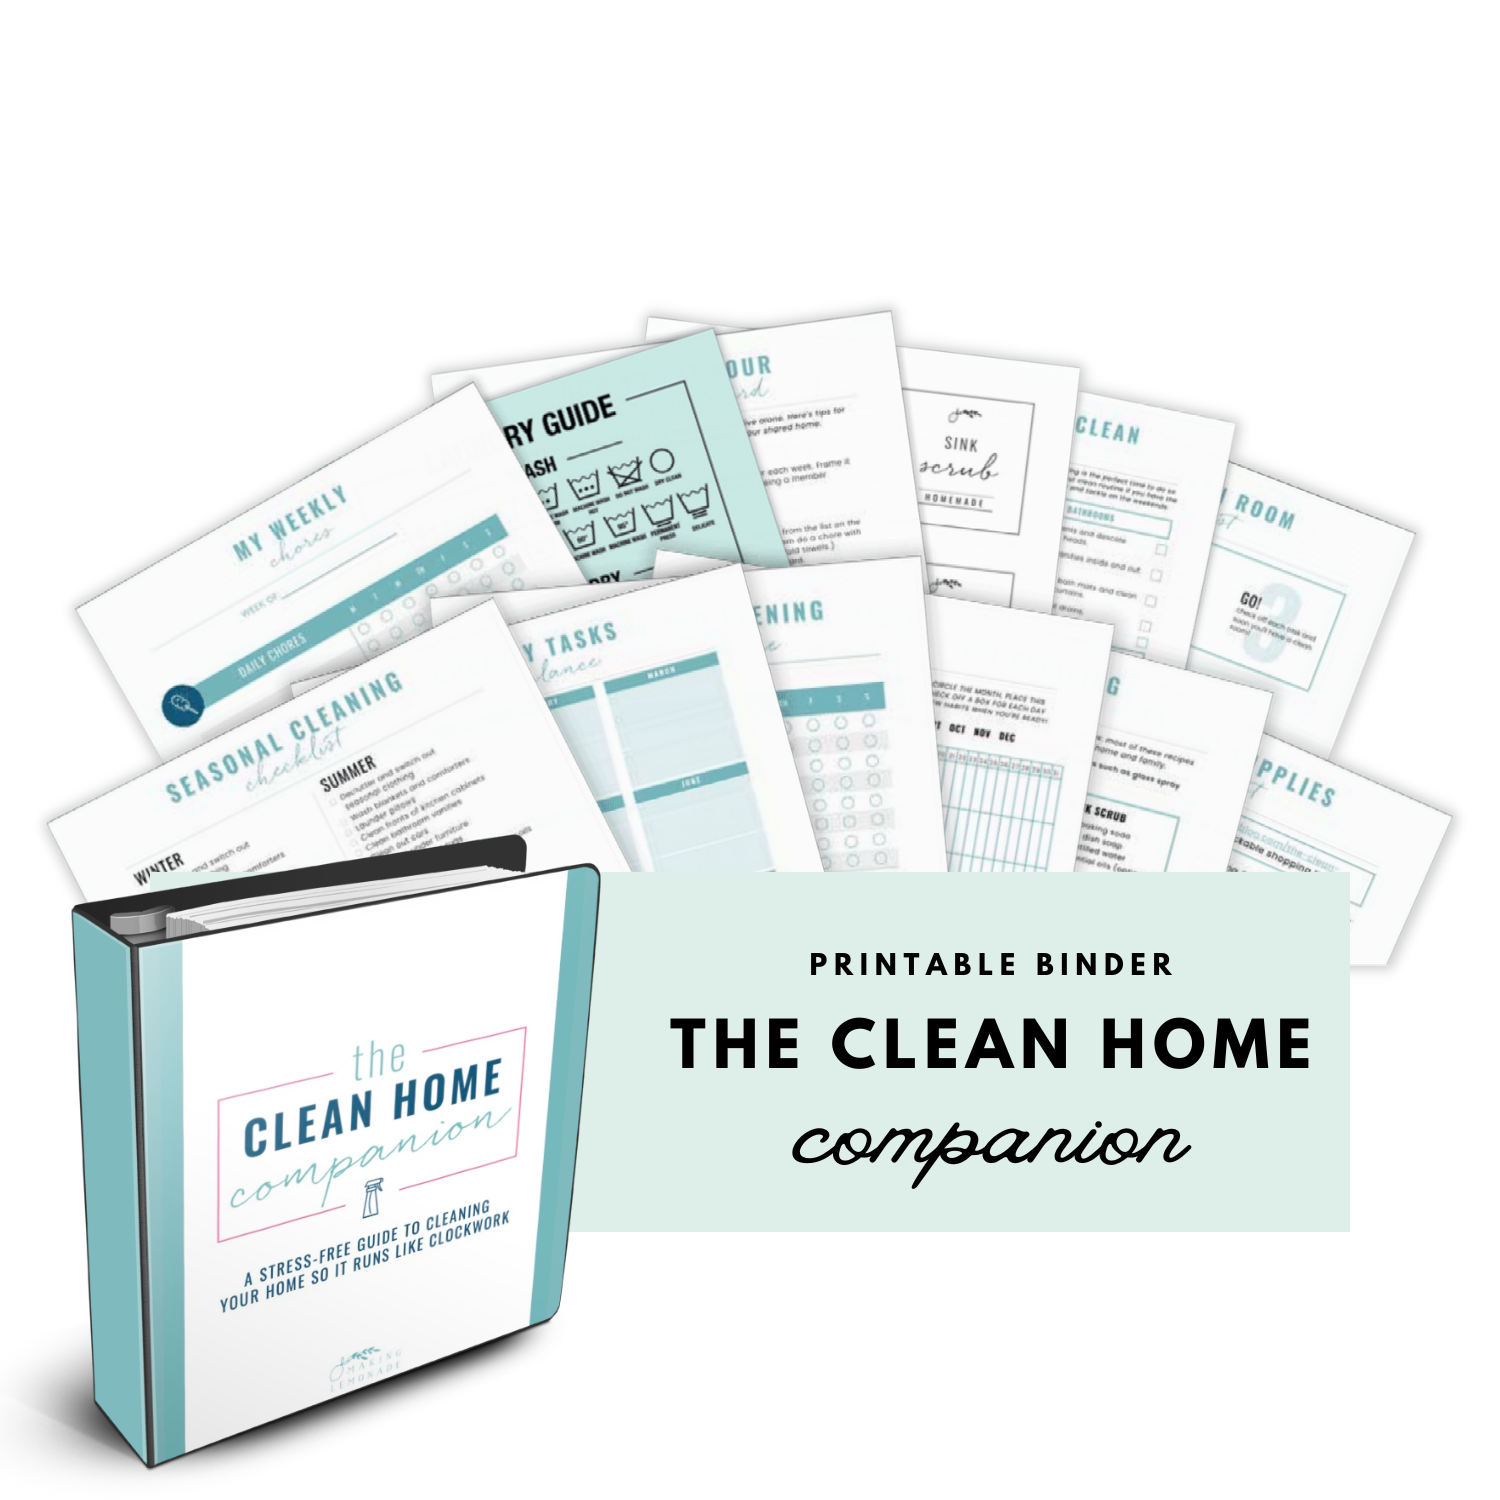 Pin by Char Vanderlinde on For the Home - Cleaning